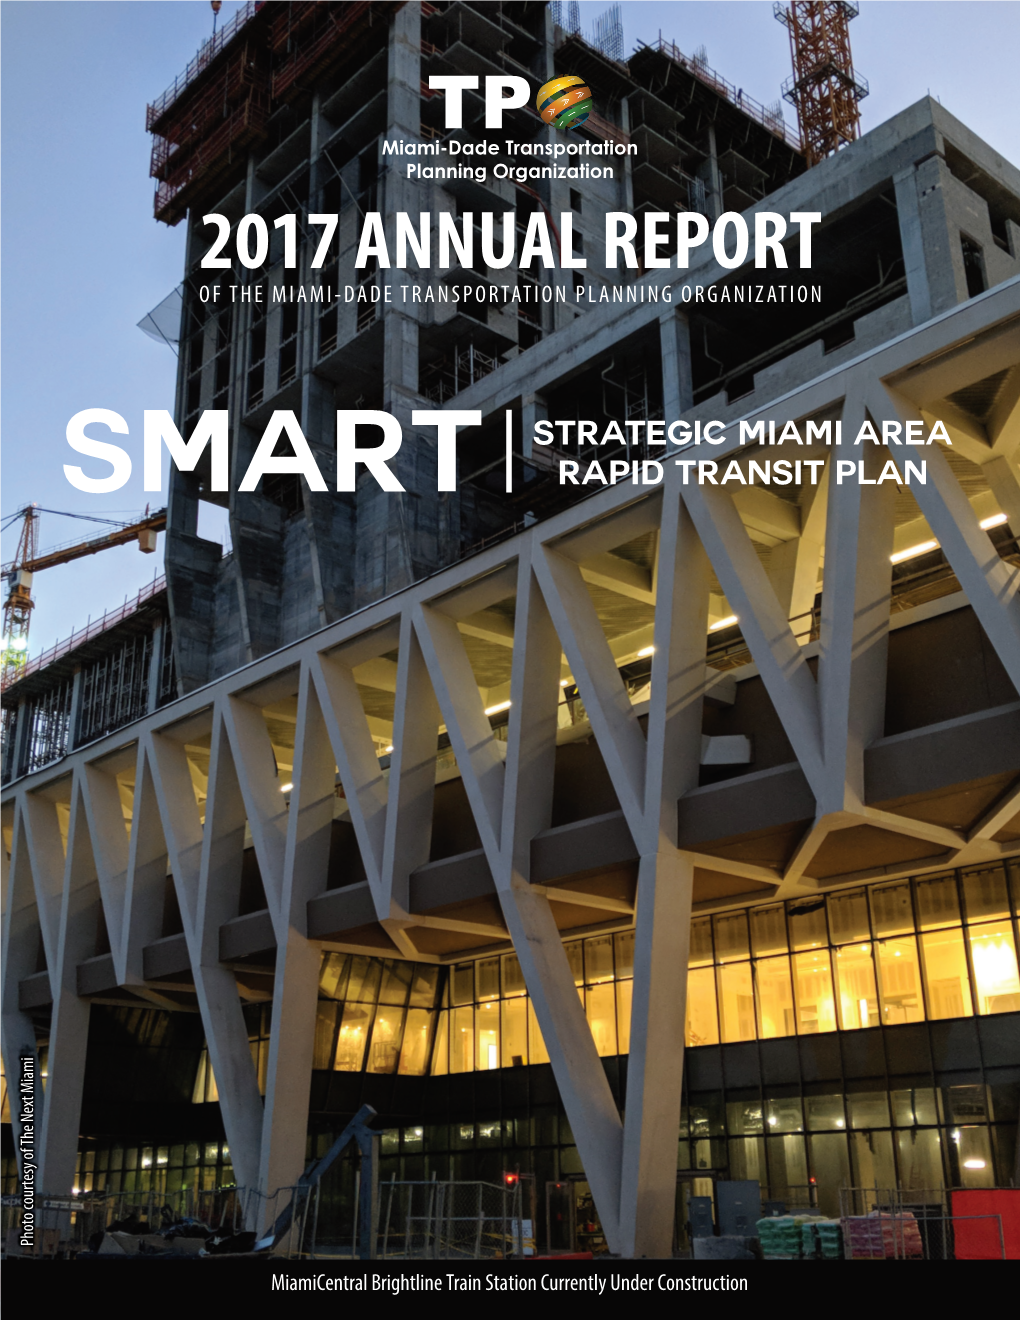 2017 Annual Report of the Miami-Dade Transportation Planning Organization